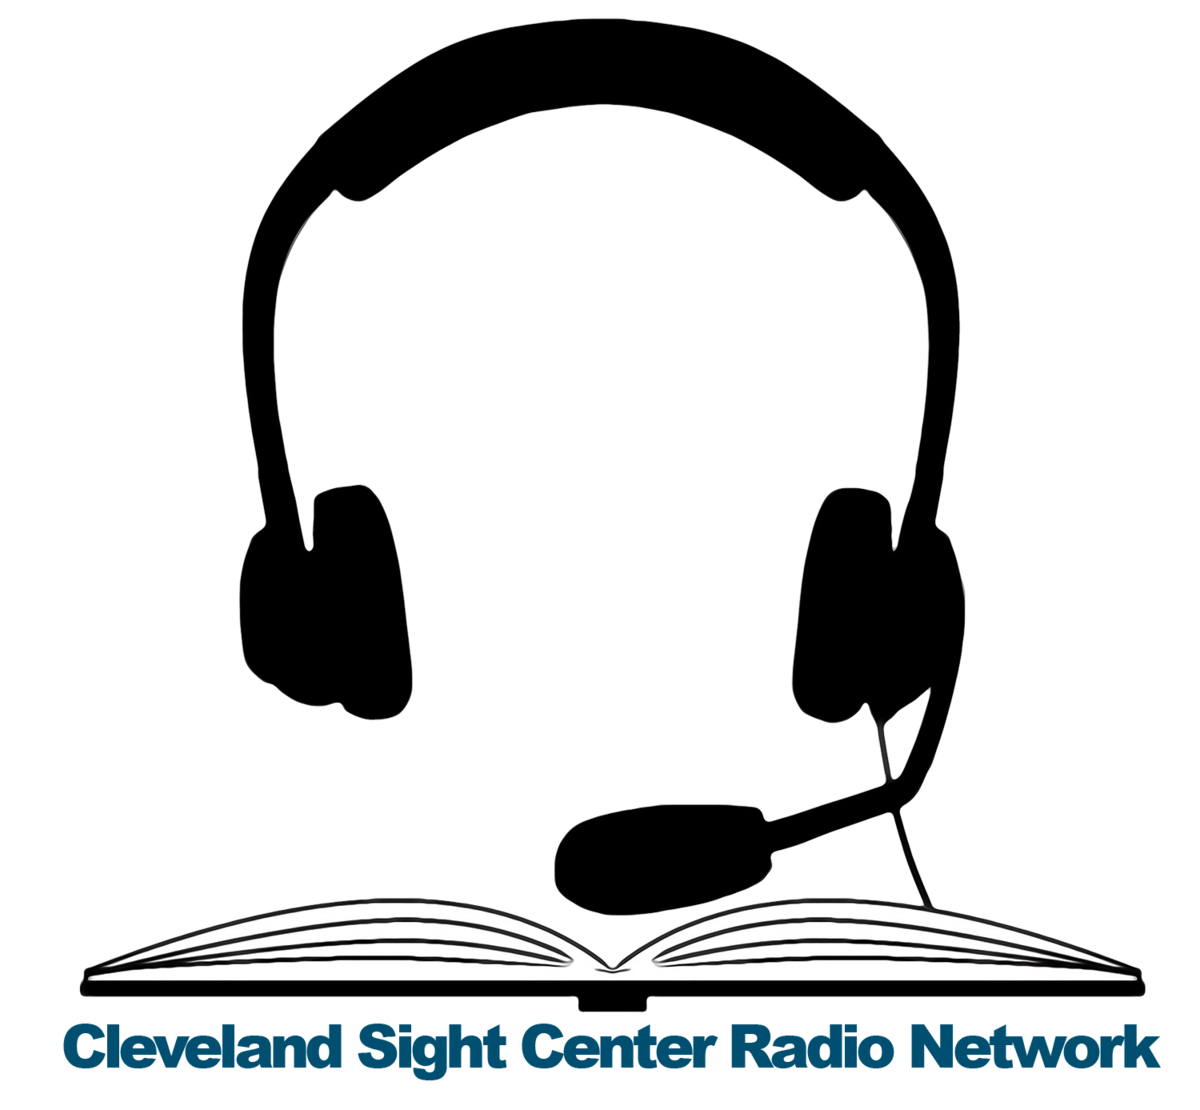 Image of an open book with headphones on top with the text Cleveland Sight Center Radio Network below the images